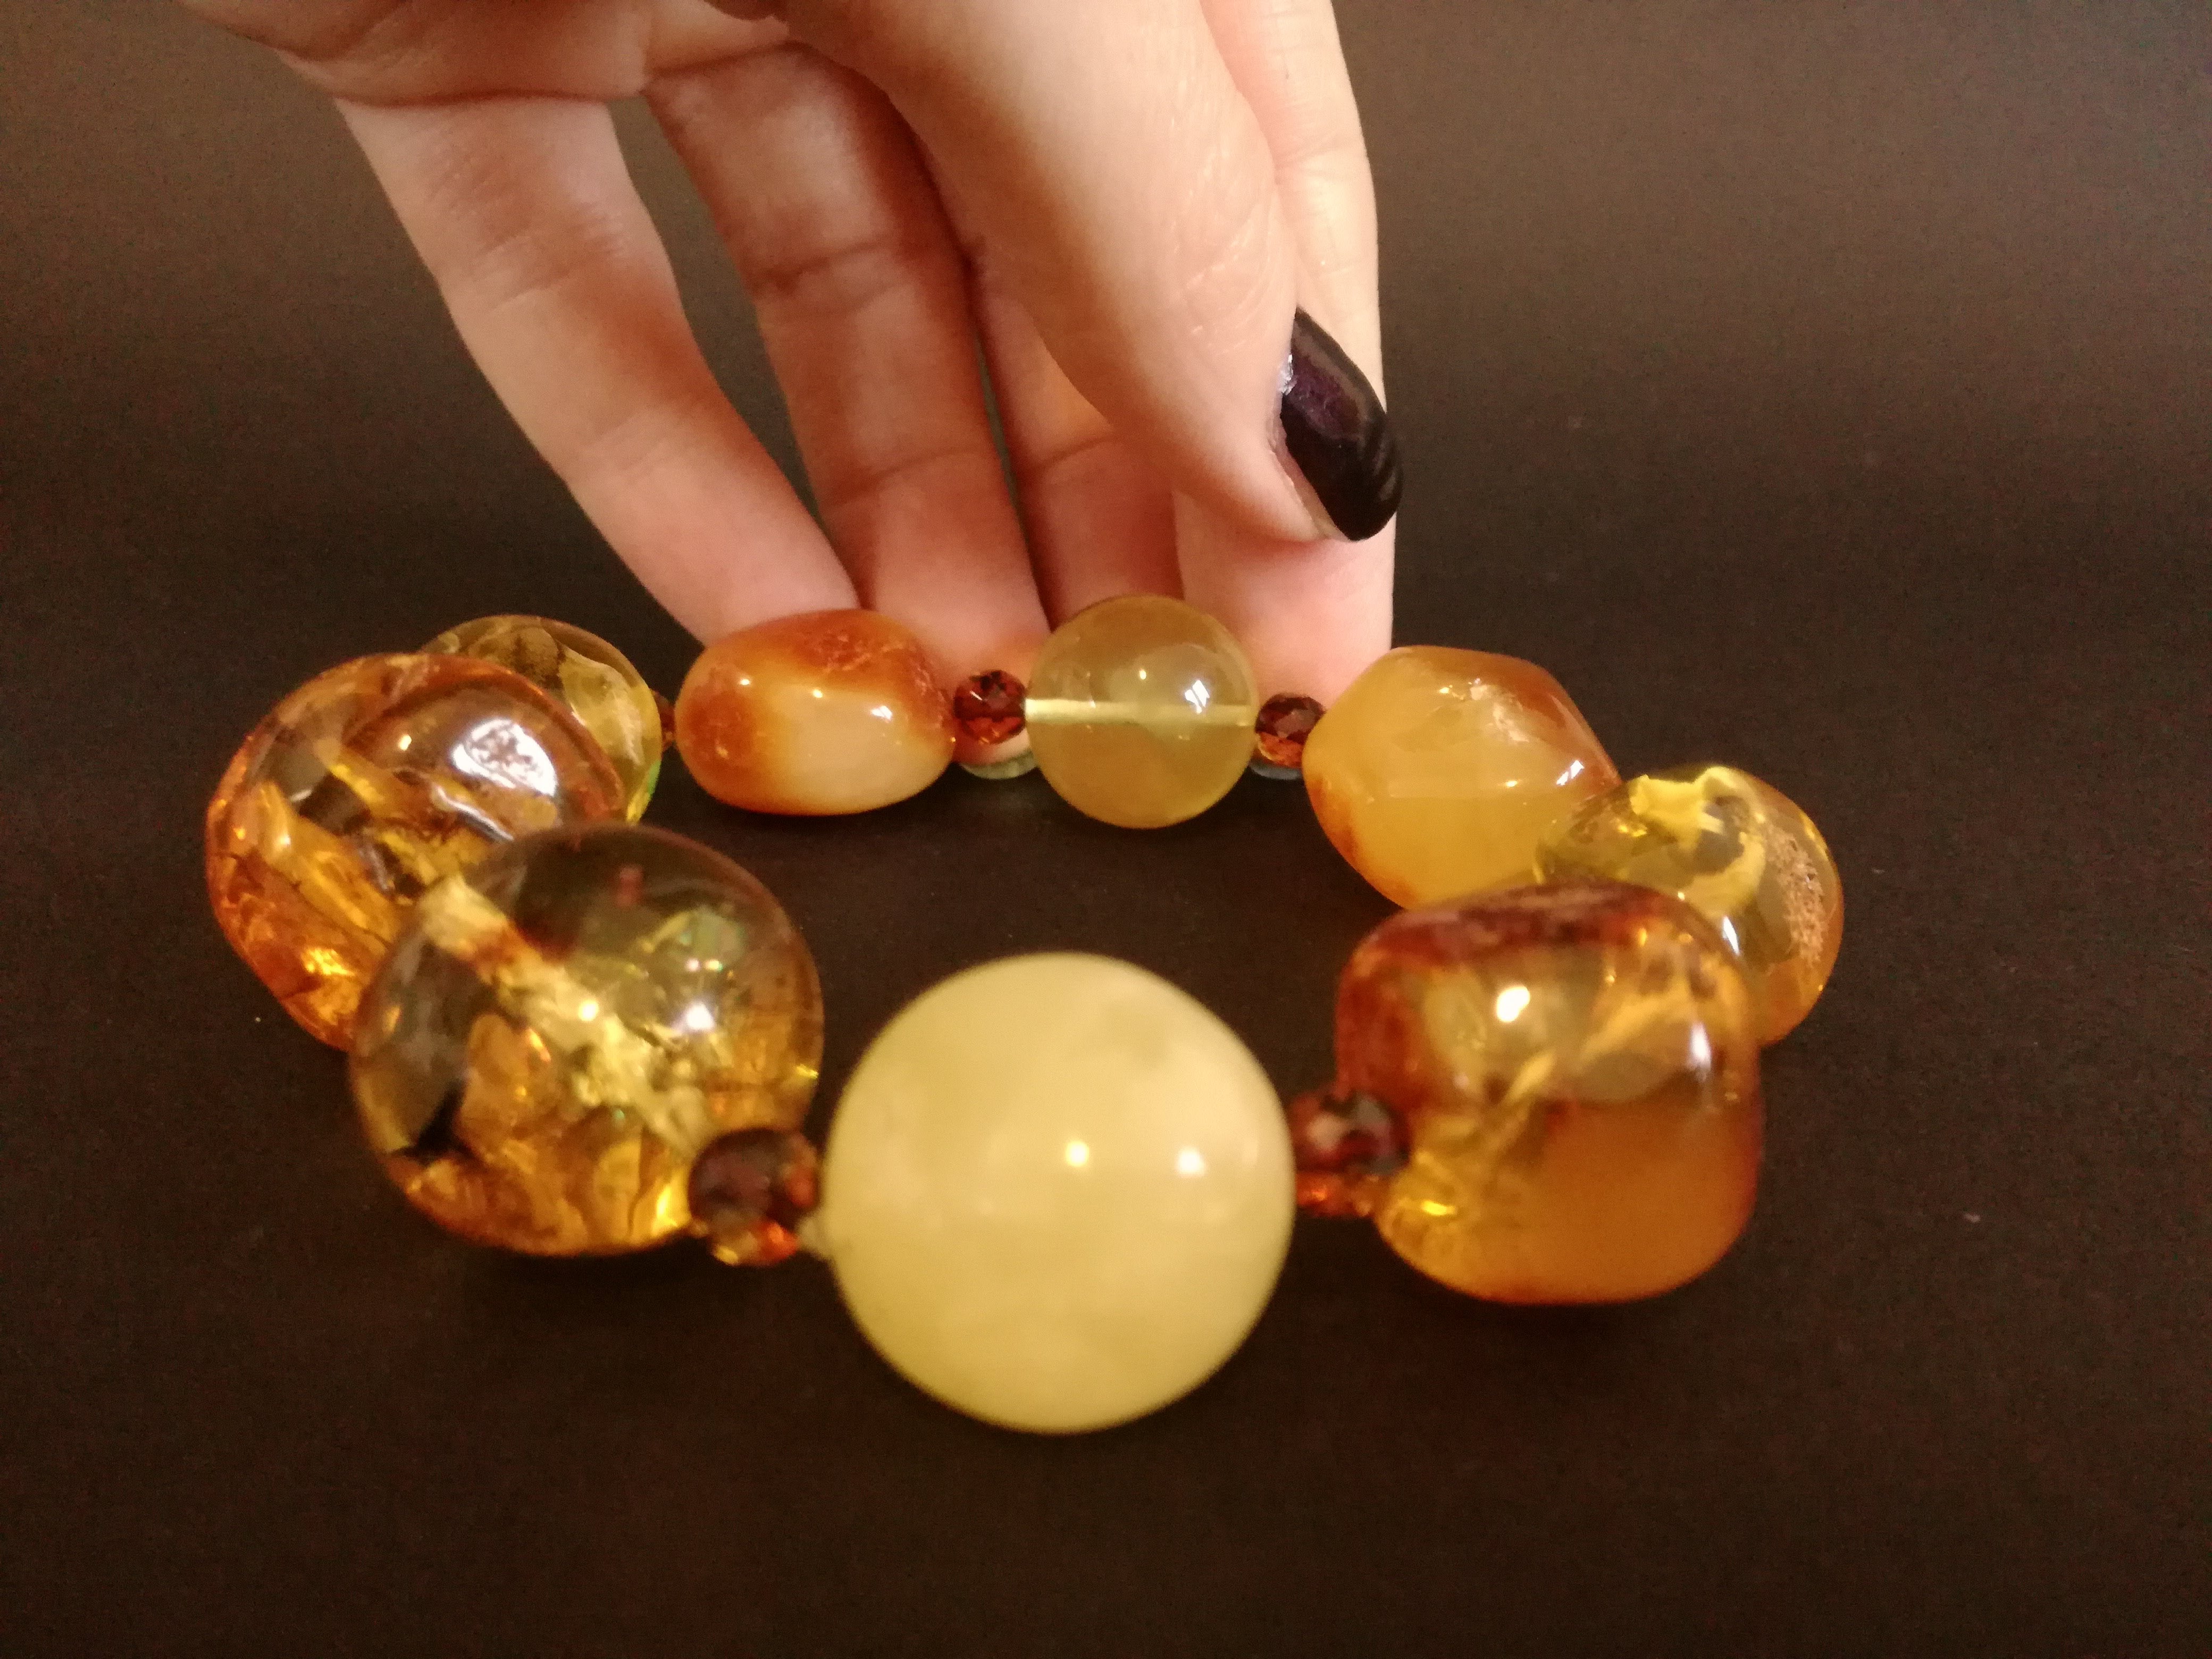 Genuine Handmade Amber Bracelet in Hand, Multicolor, Big Size, Big round beads and small faceted beads, For Her, Nursing Mums